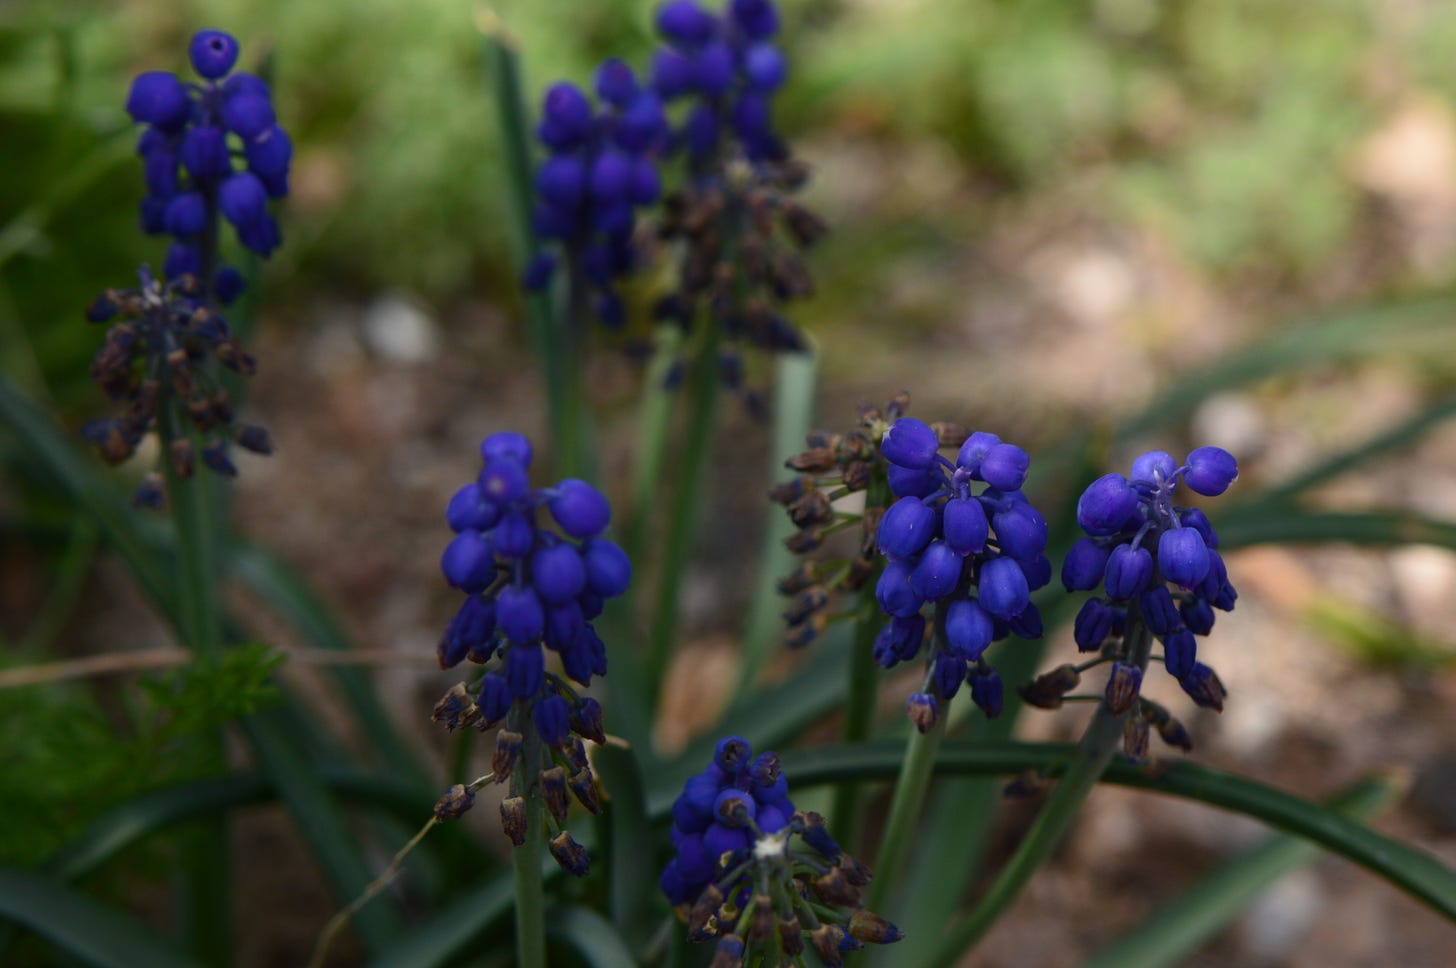 round, bulbous florets of blue grape hyacinths going to seed